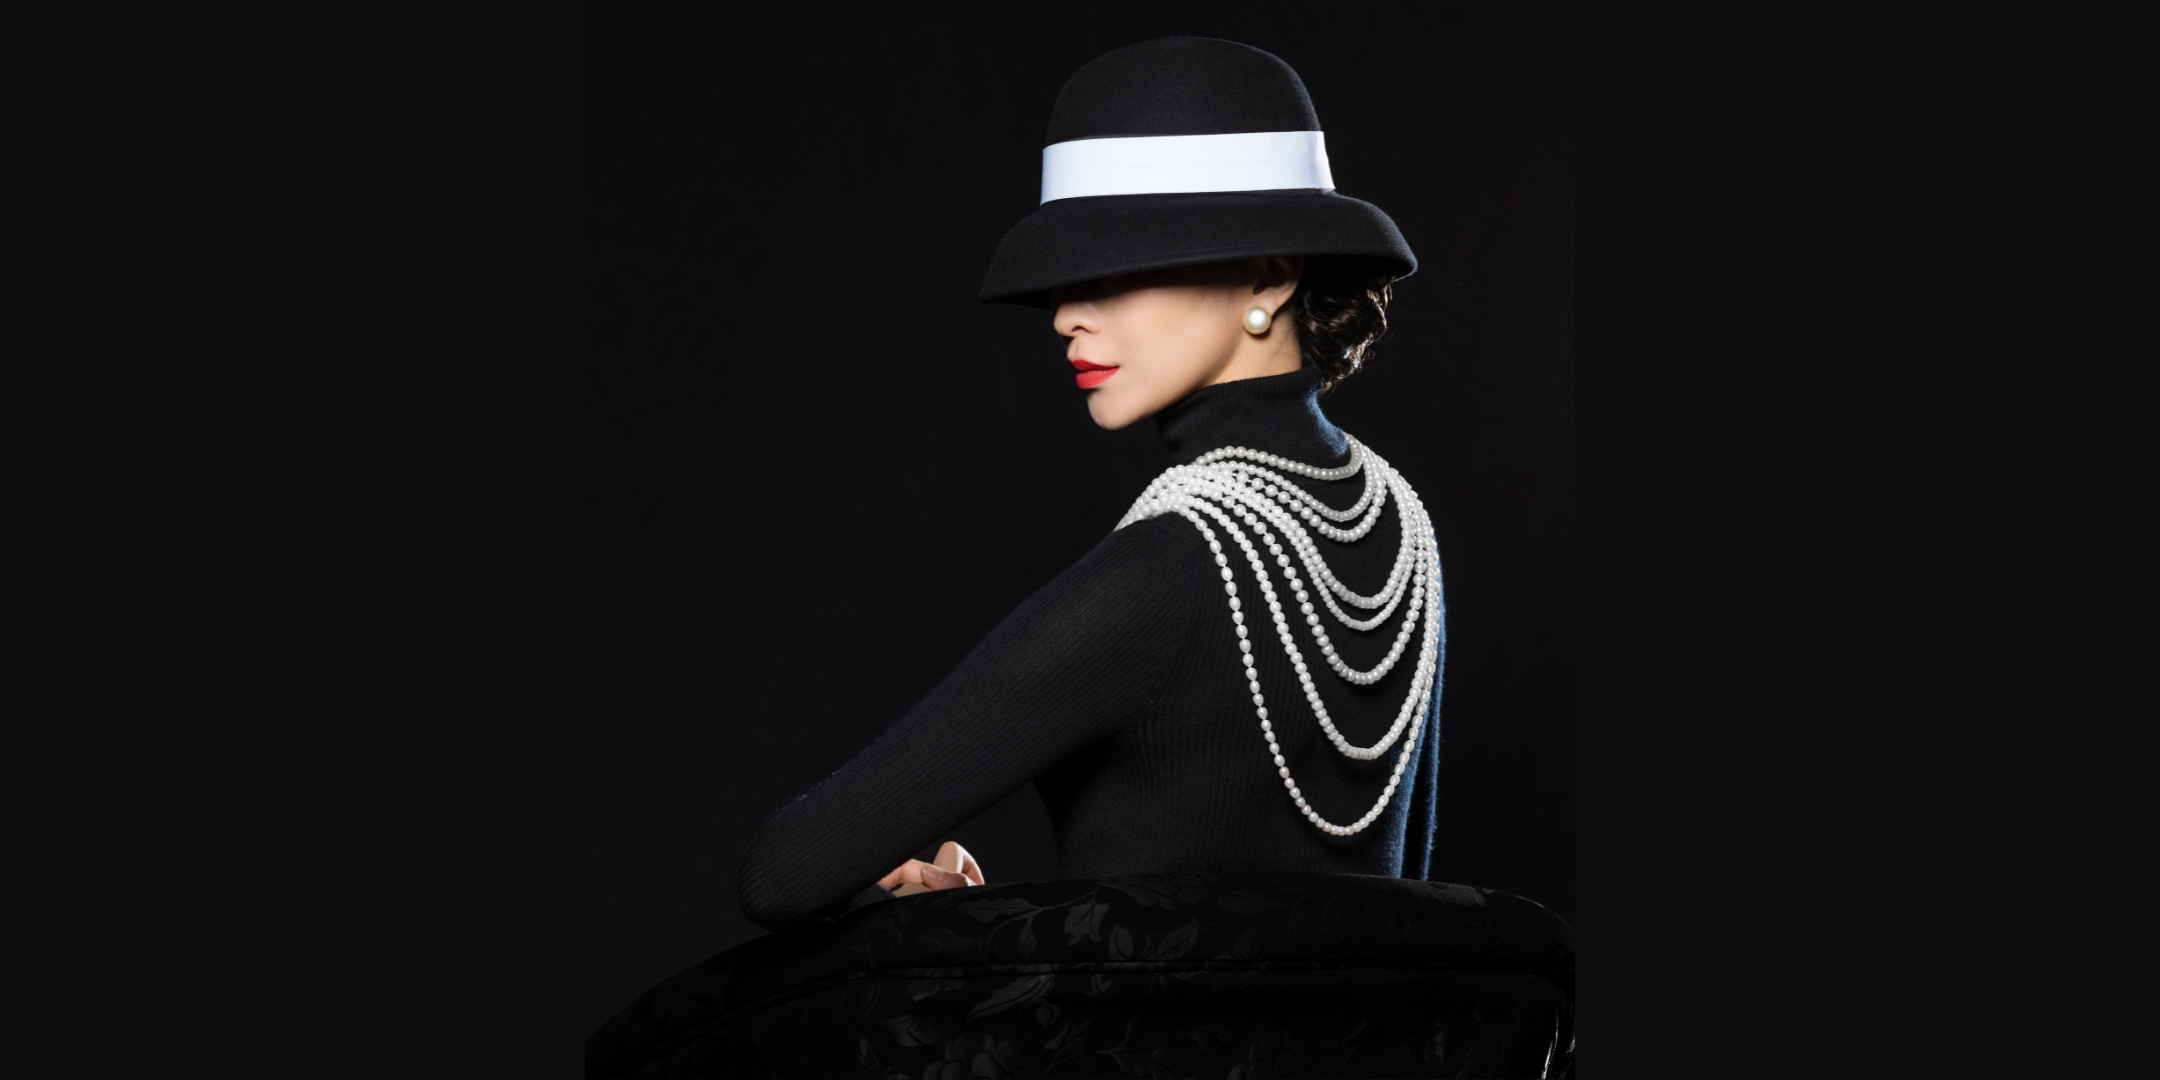 In front of a pitch black background, a female dancer in a sleek black turtleneck and fashionable hat (black, round top, with a white sash around the middle) that covers her eyes poses behind a black chair. She is shown chest-up and her body is turned sideways as she turns her chin toward the camera, a sly look on her face. She wears bright red lipstick, large pearl earrings and eight stacked pearl necklaces.